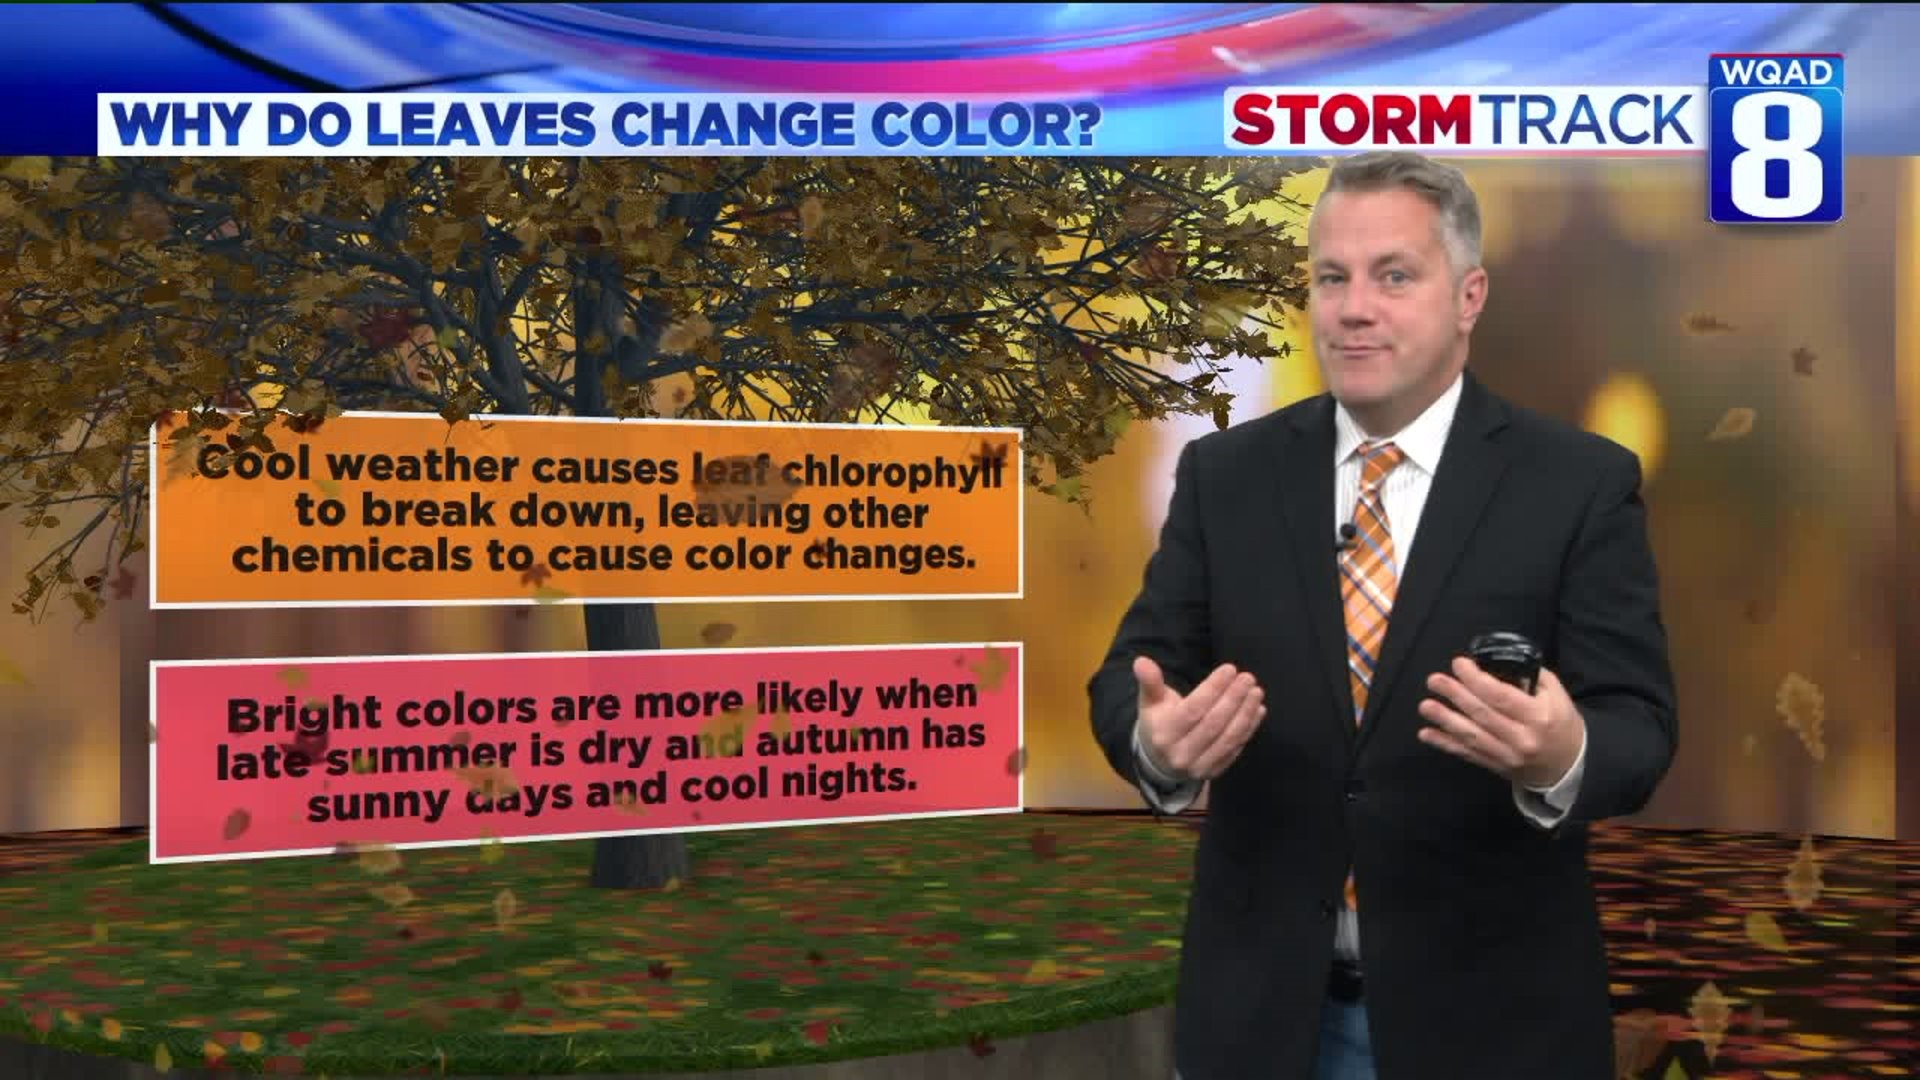 Eric says these cold mornings are good for vivid fall color